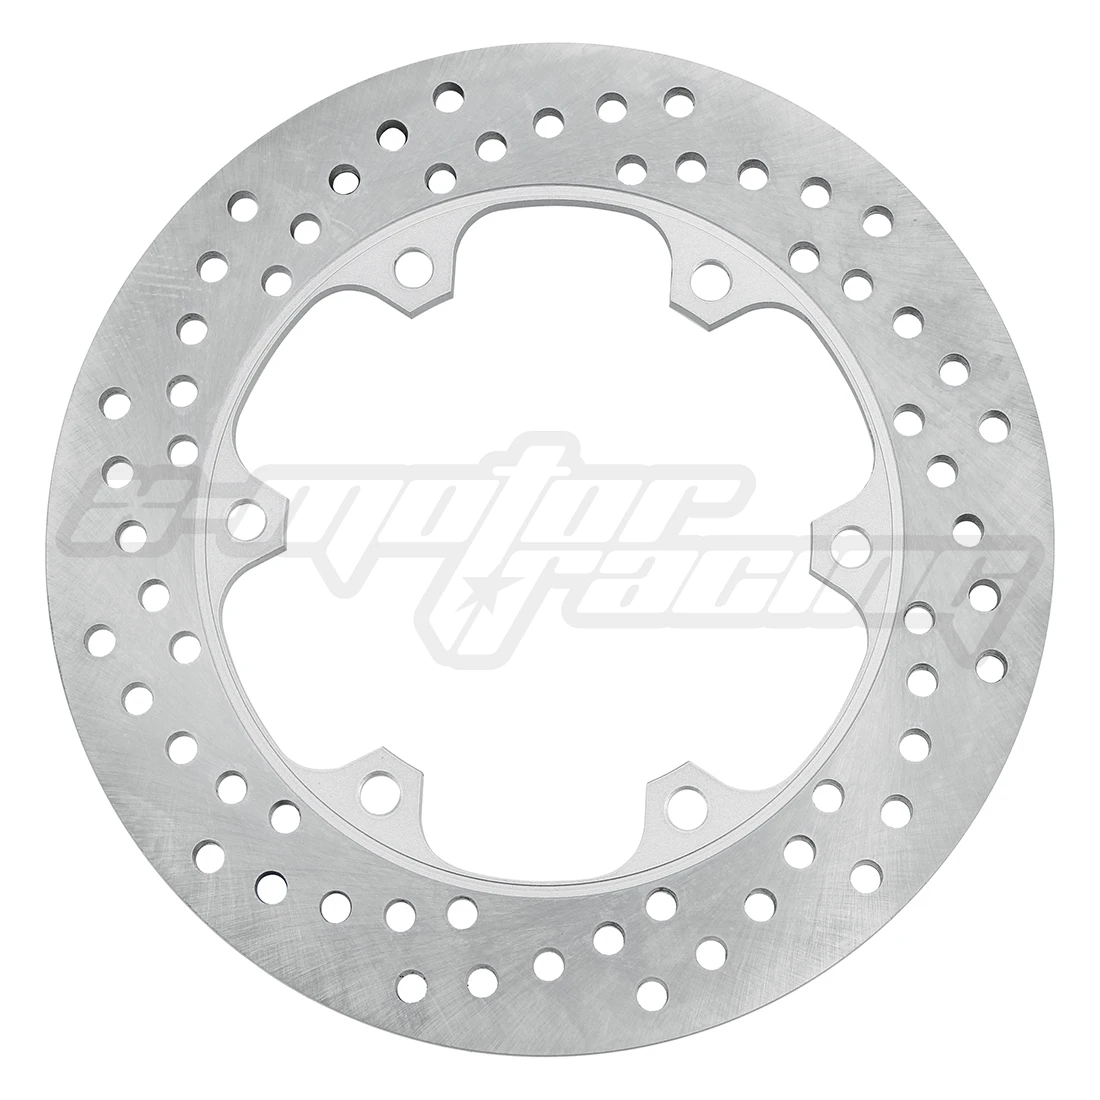 Enlarge 276mm Motorcycle Rear Brake Disc Rotor For Honda NT700 2007-2013 Deauville 2006-2012 NT650 Deauville 1998-2005